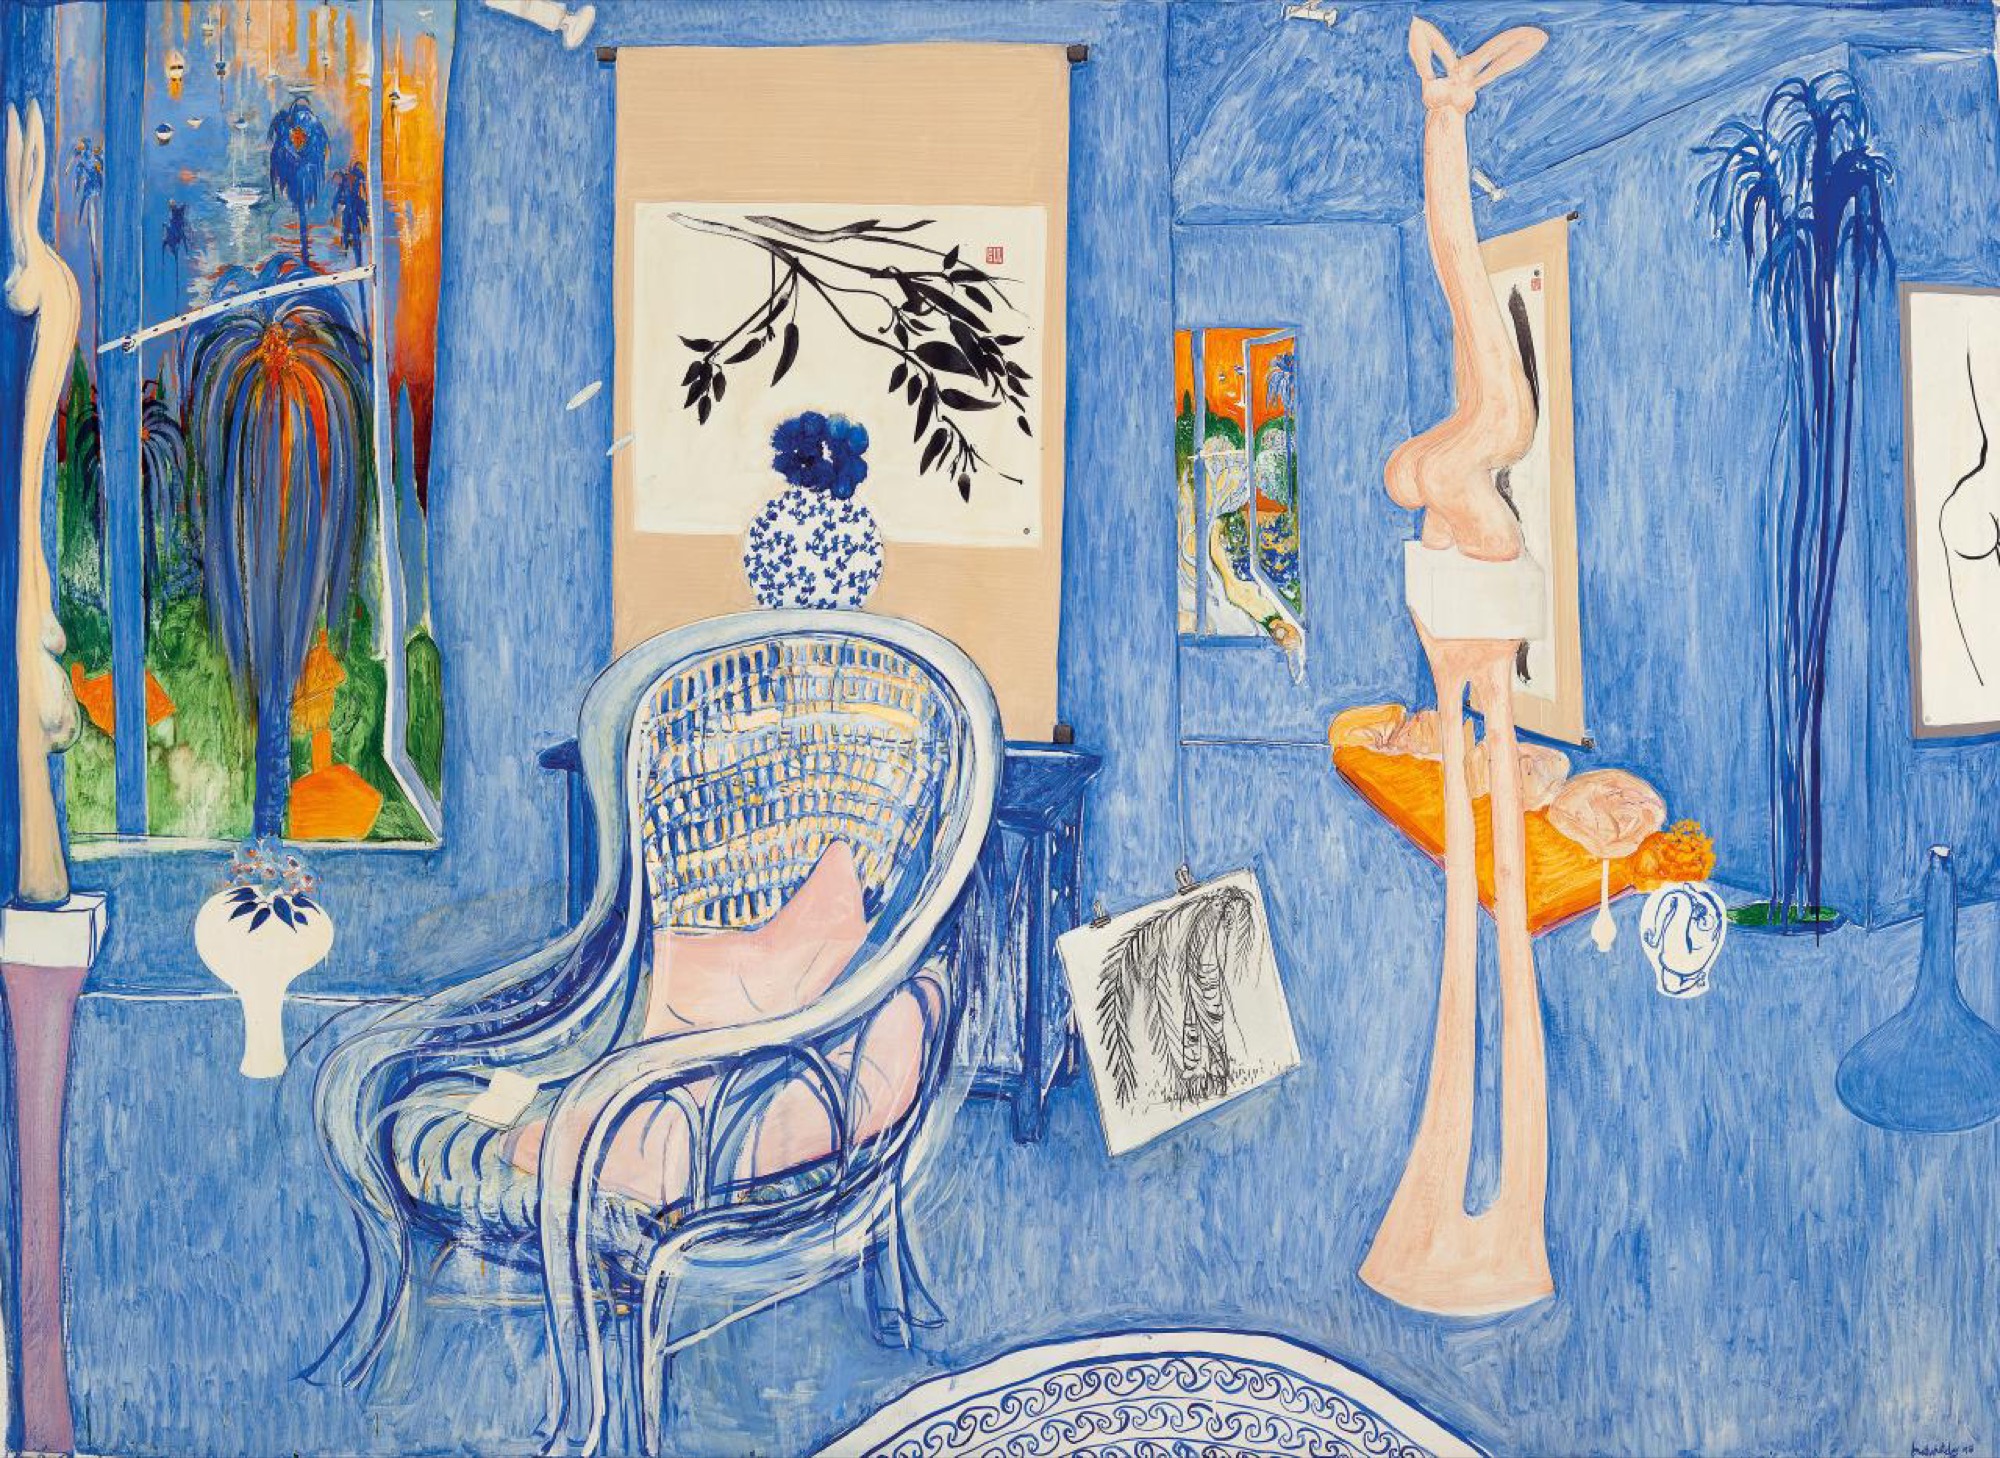 Brett WHITELEY, <em>My armchair</em>, 1976, oil on canvas, 206.5 x 283.5 cm. Private collection, Melbourne, © Wendy Whiteley